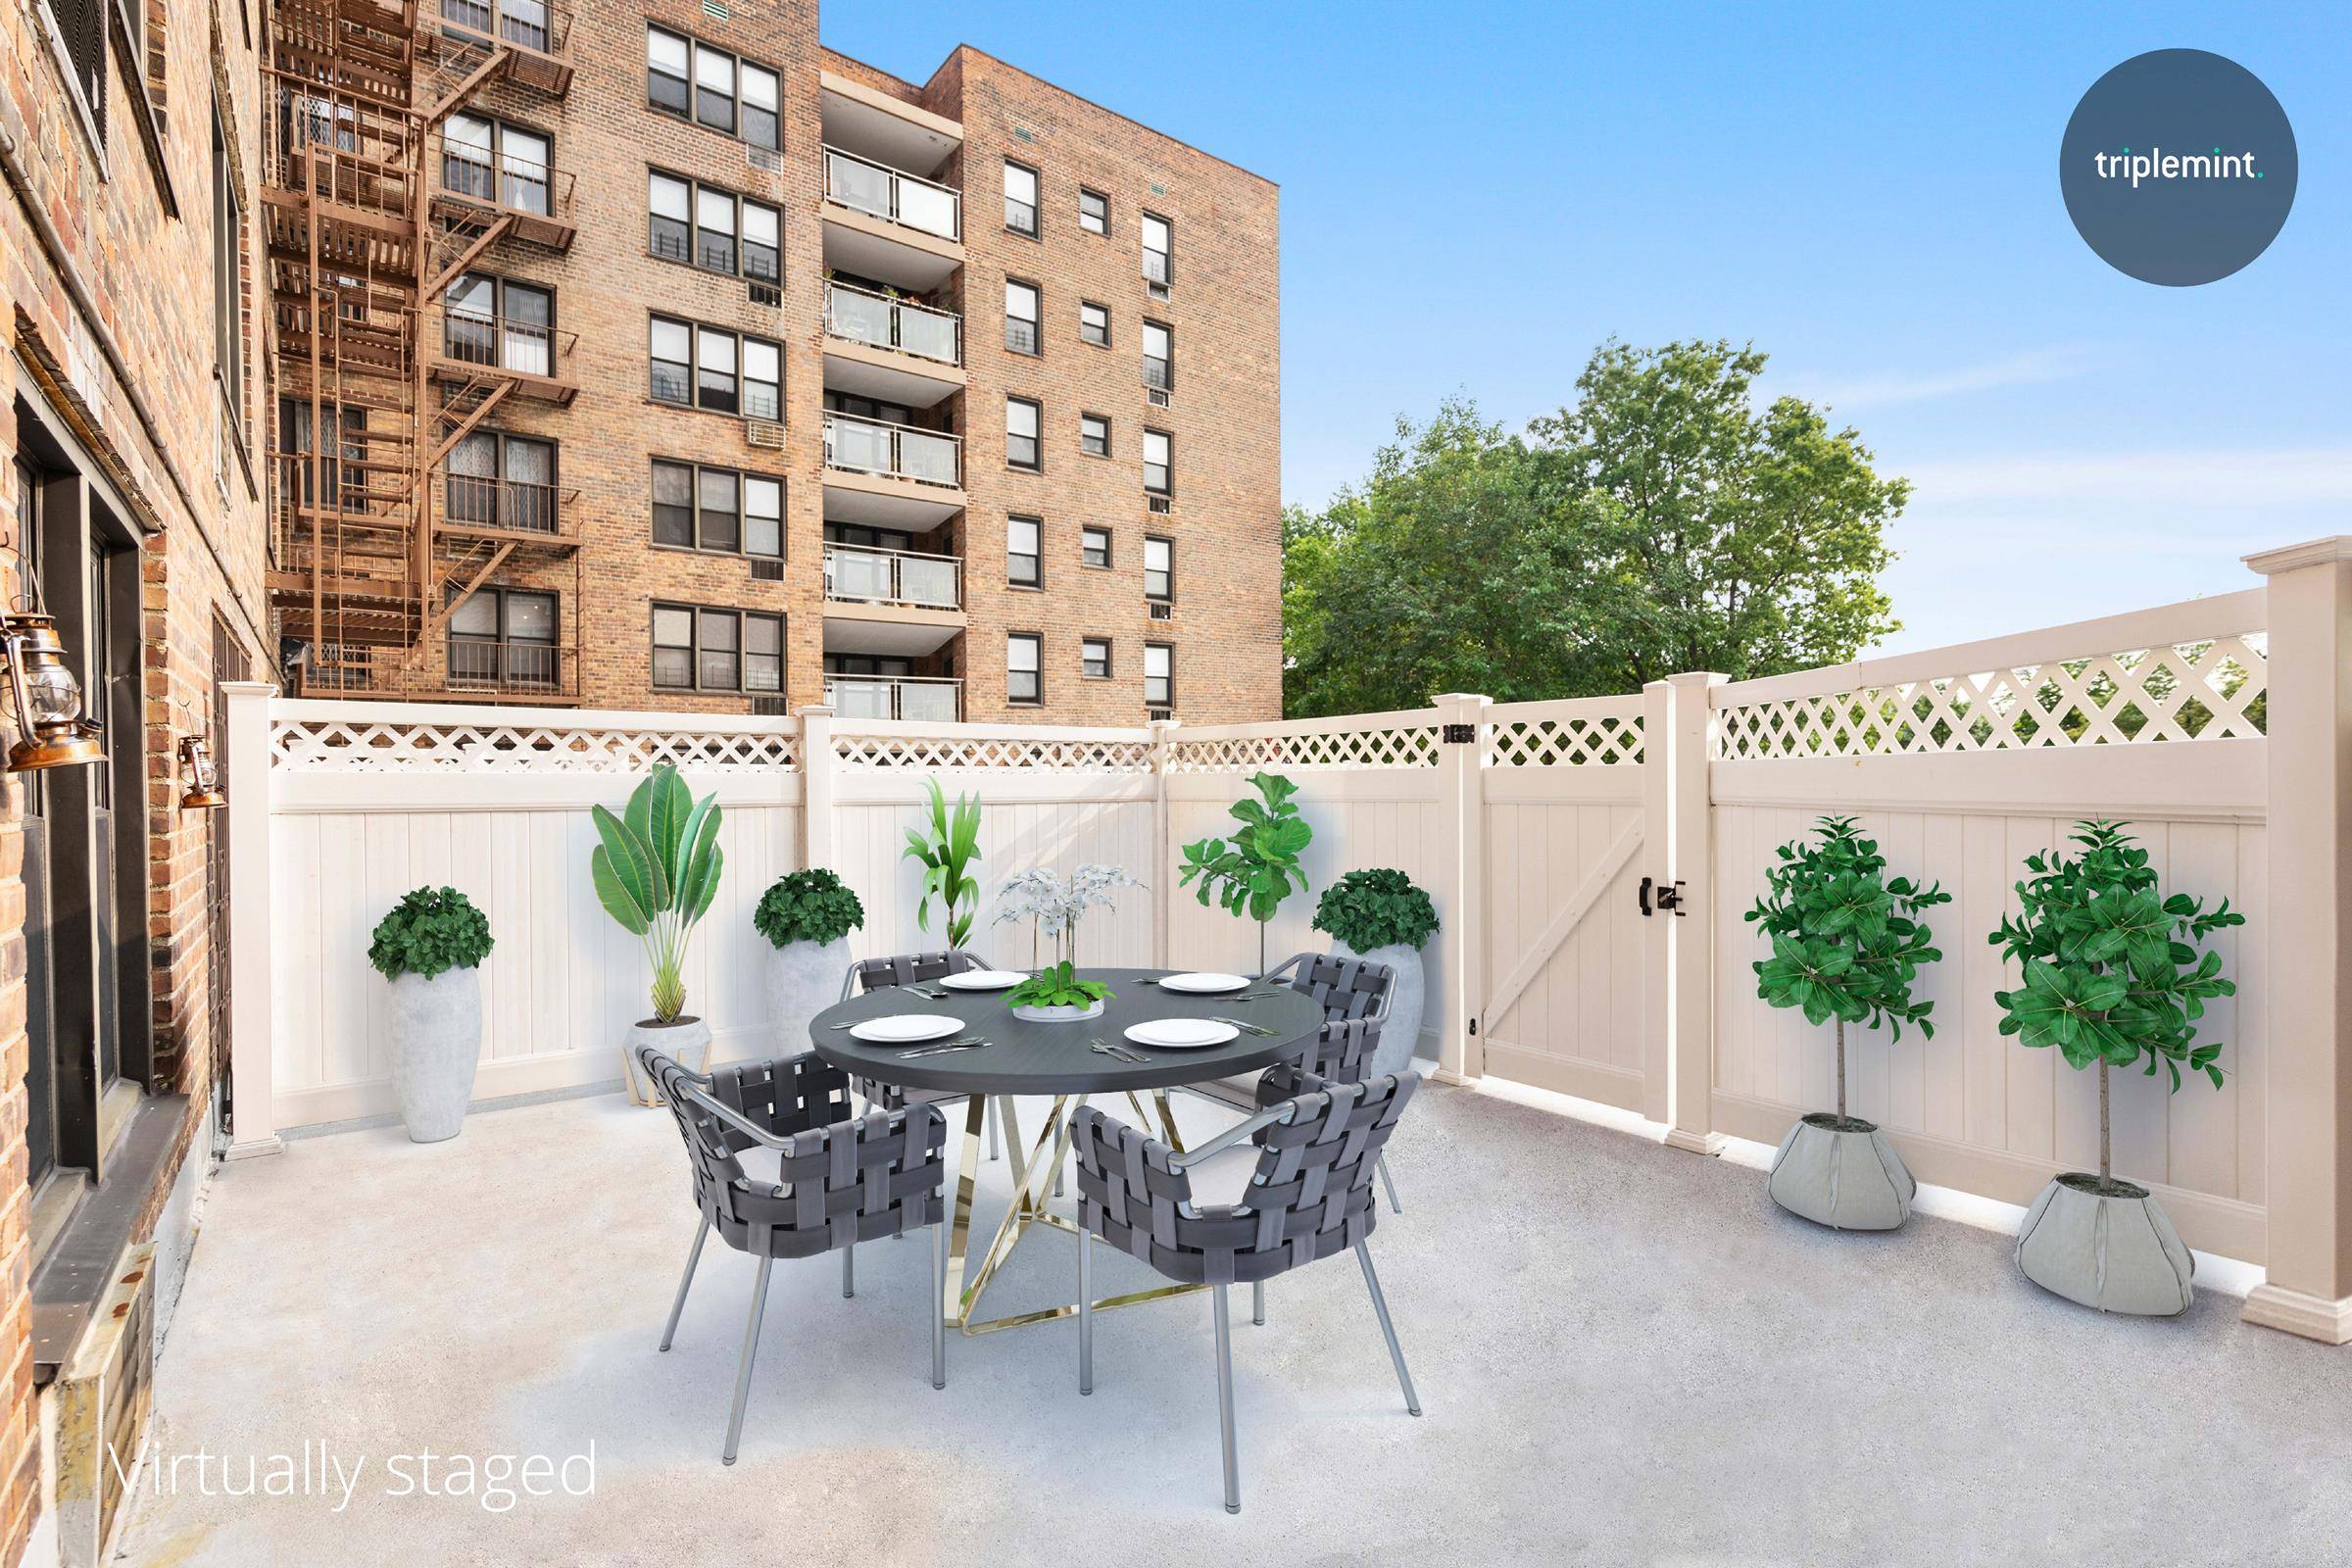 Welcome to Apartment 249 at the Andrew Jackson, a full service condo building just a block away from the bustling energy of Jackson Heights' infamous 37th Avenue, on a quiet, ...